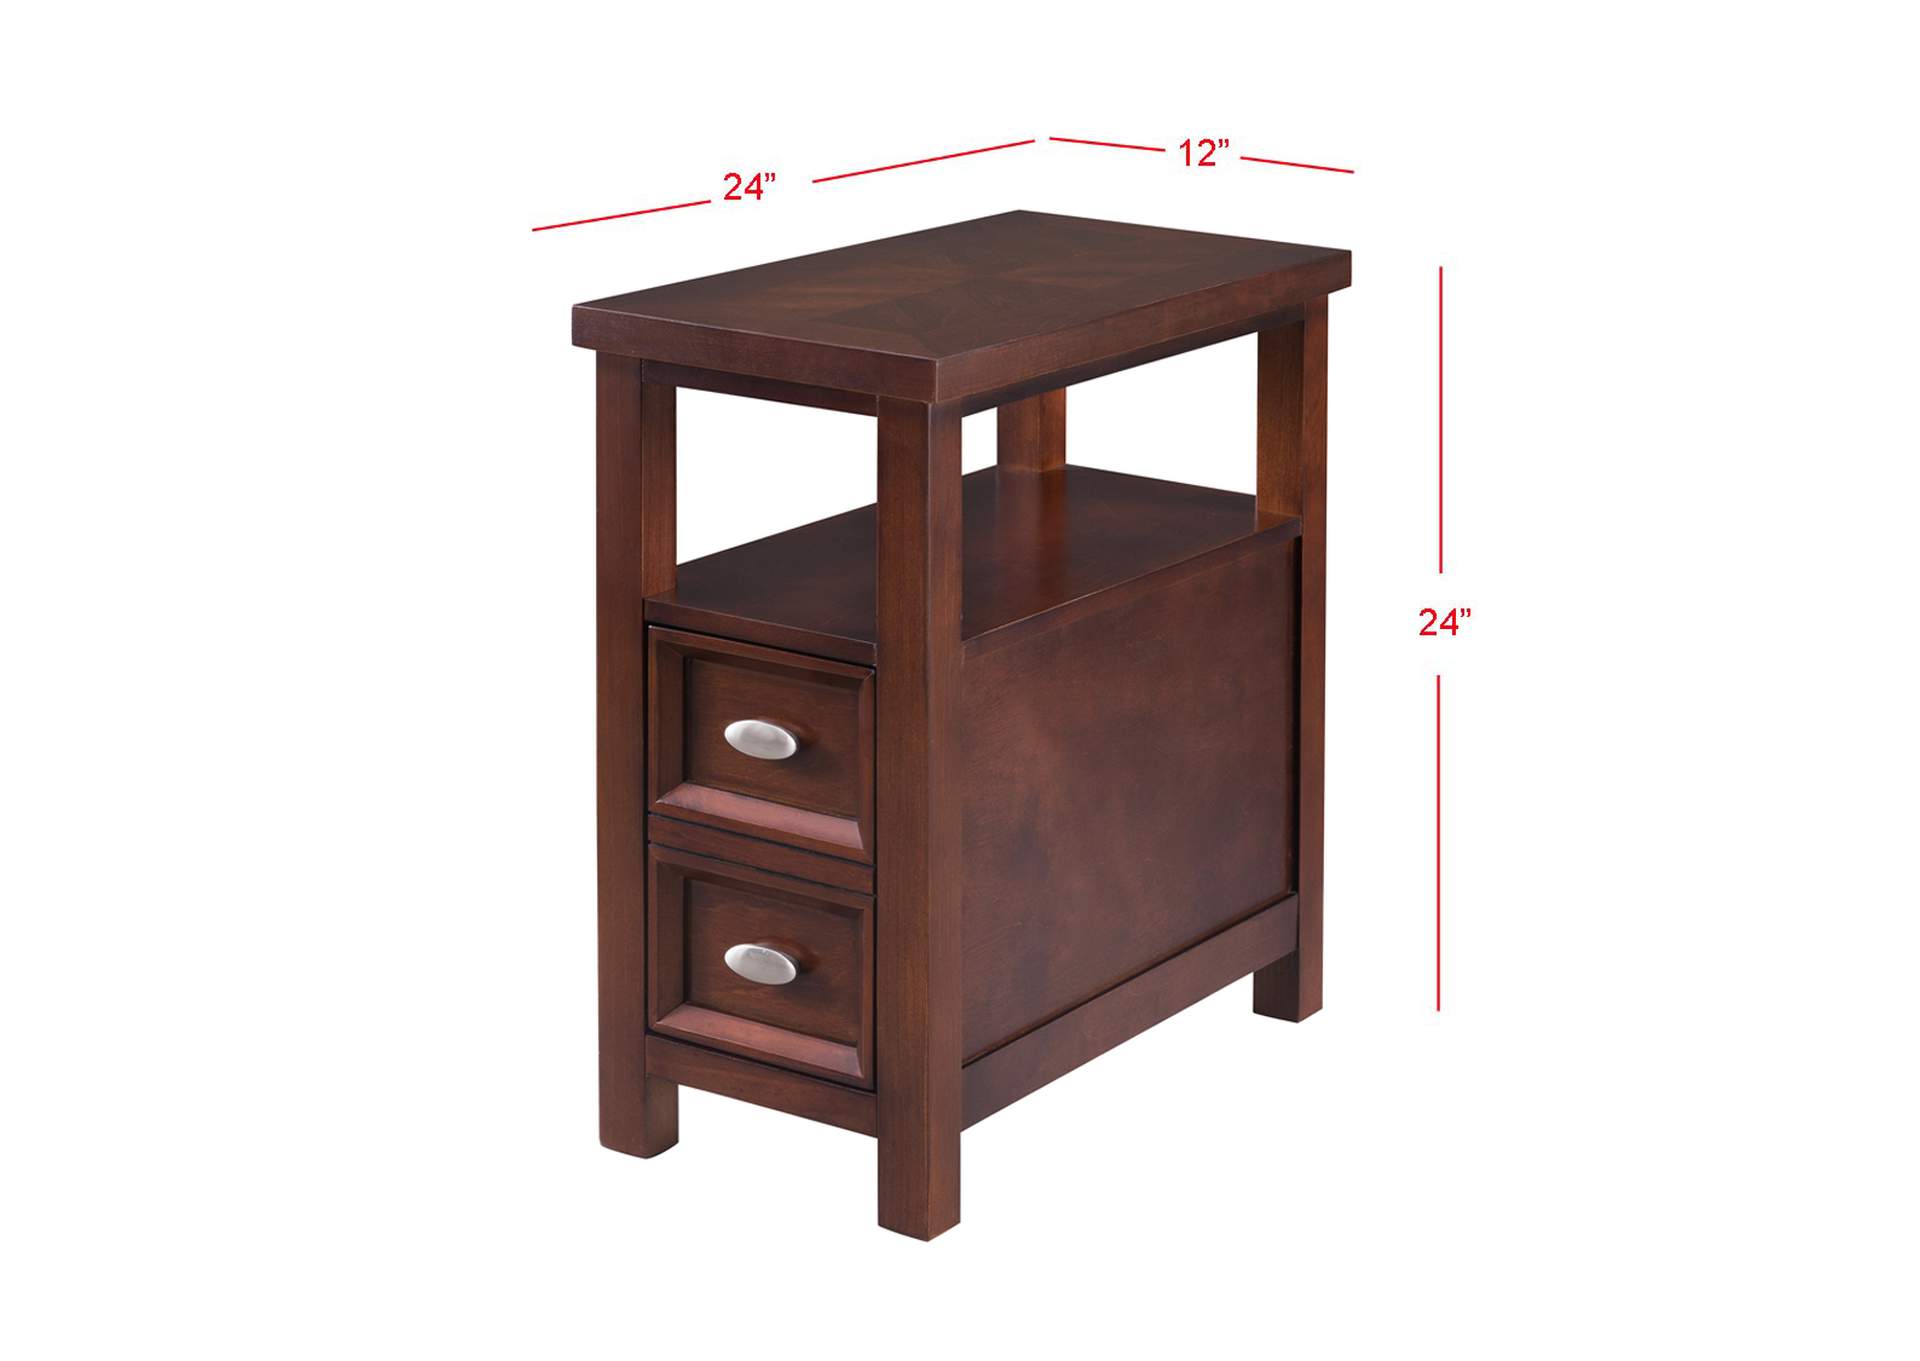 Dempsey Brown Dempsey Chairside Table,Crown Mark